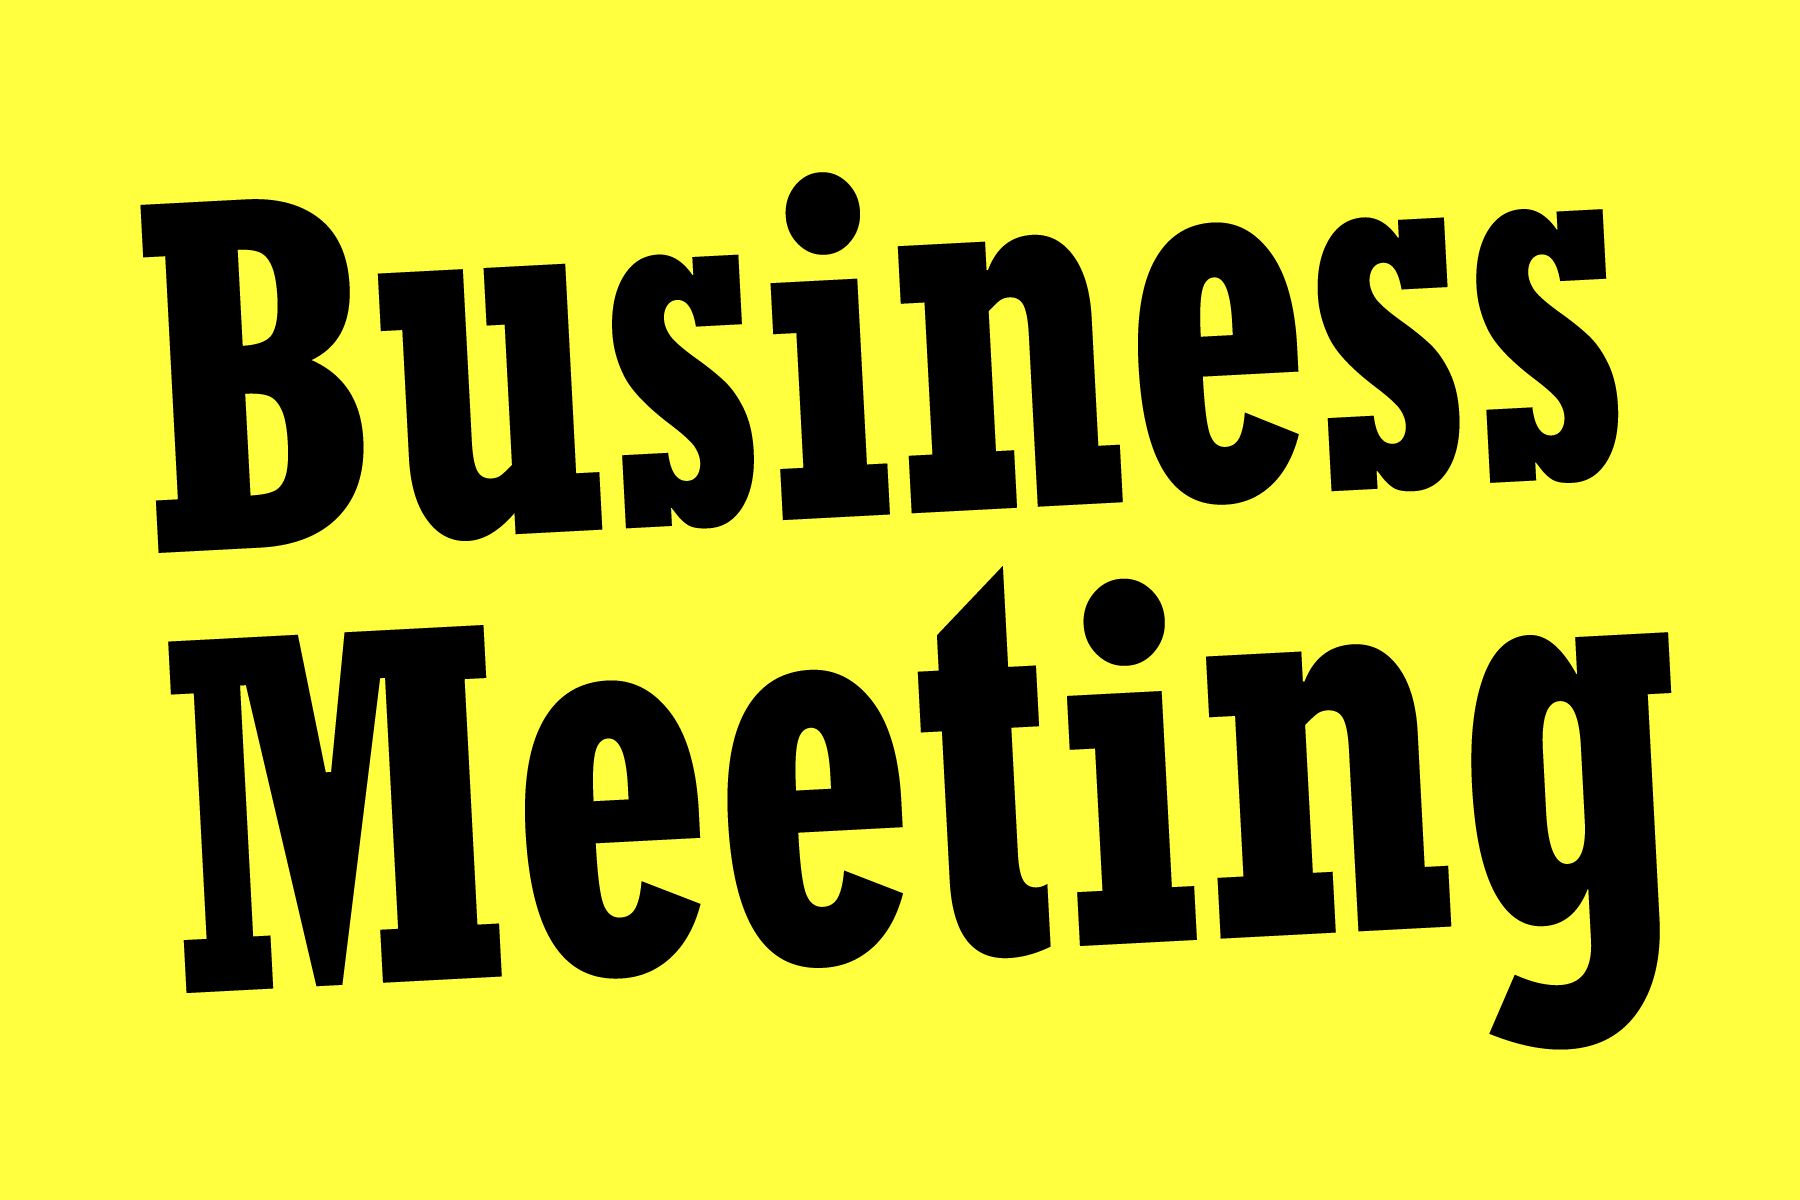     Business Meeting Images Church Business Meeting Clipart   Free Clipart